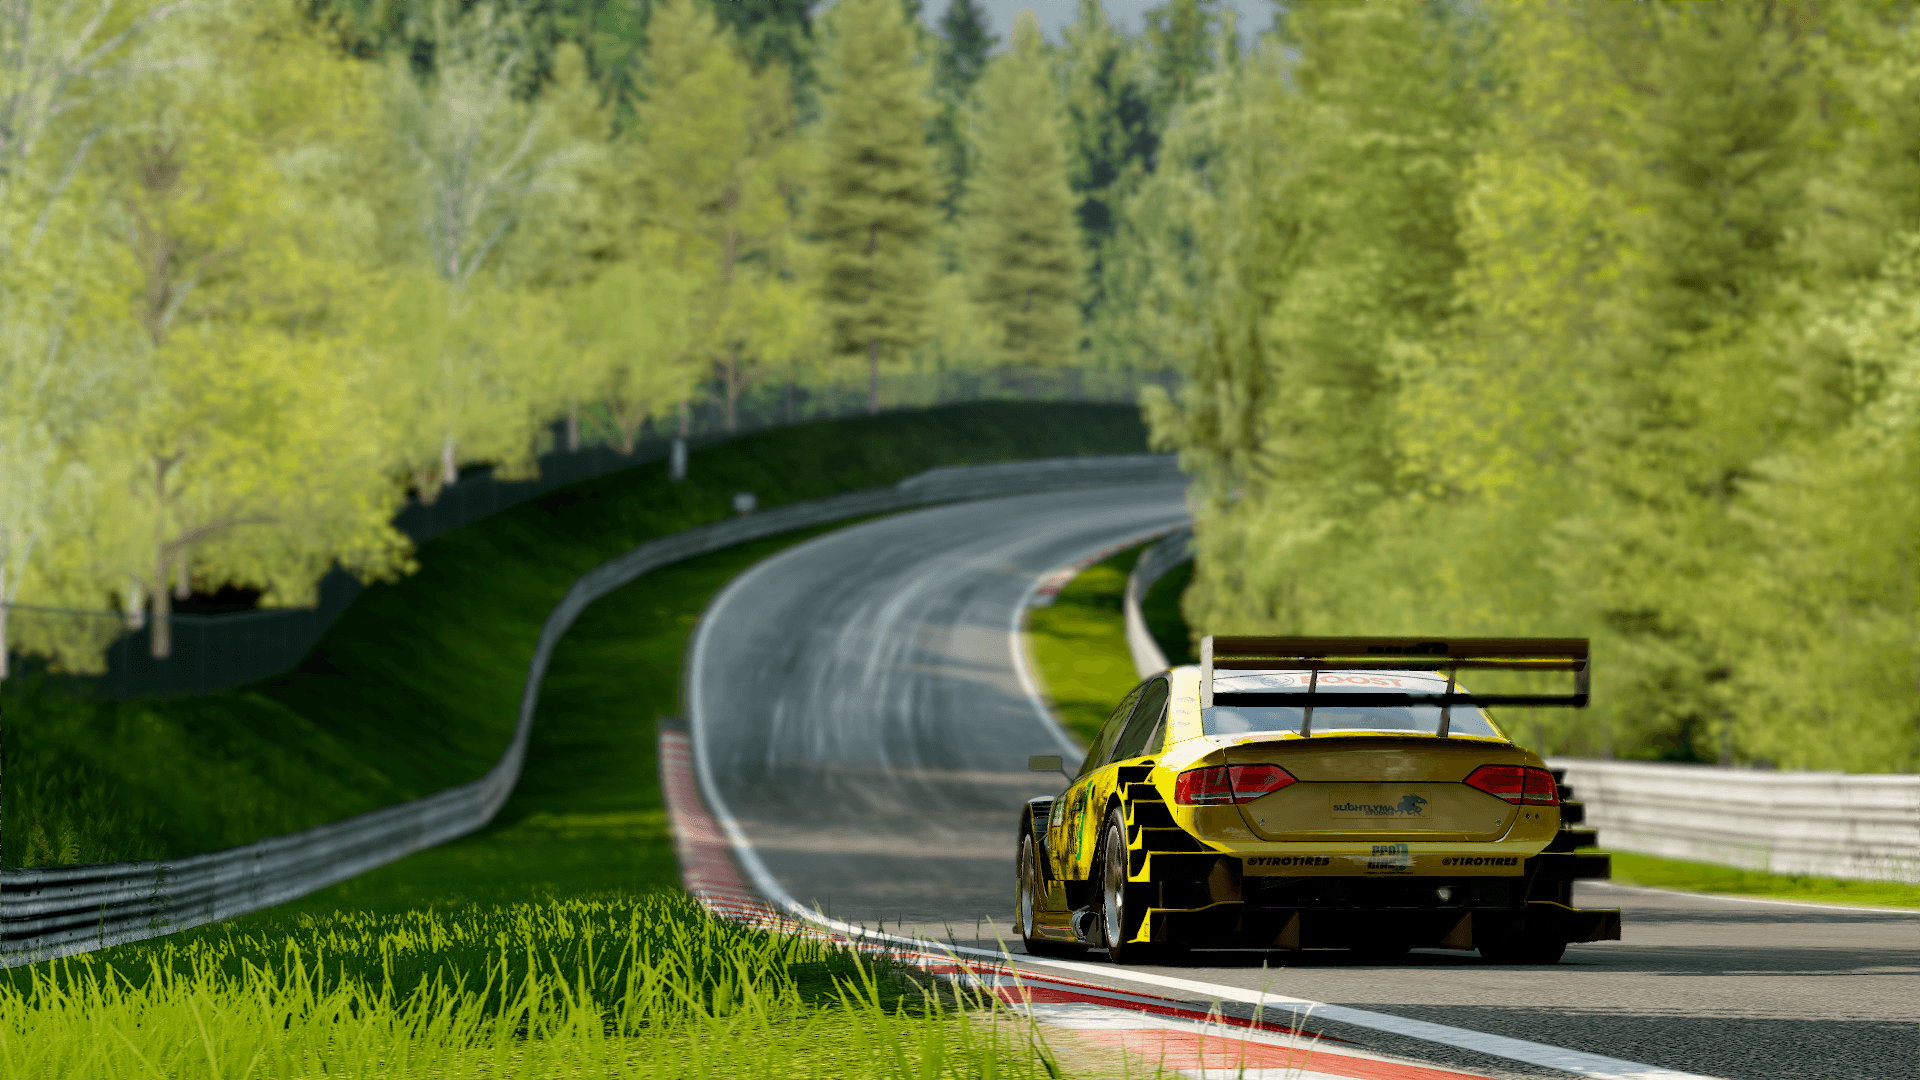 Project Cars Wallpaper 44769 1920x1080 px